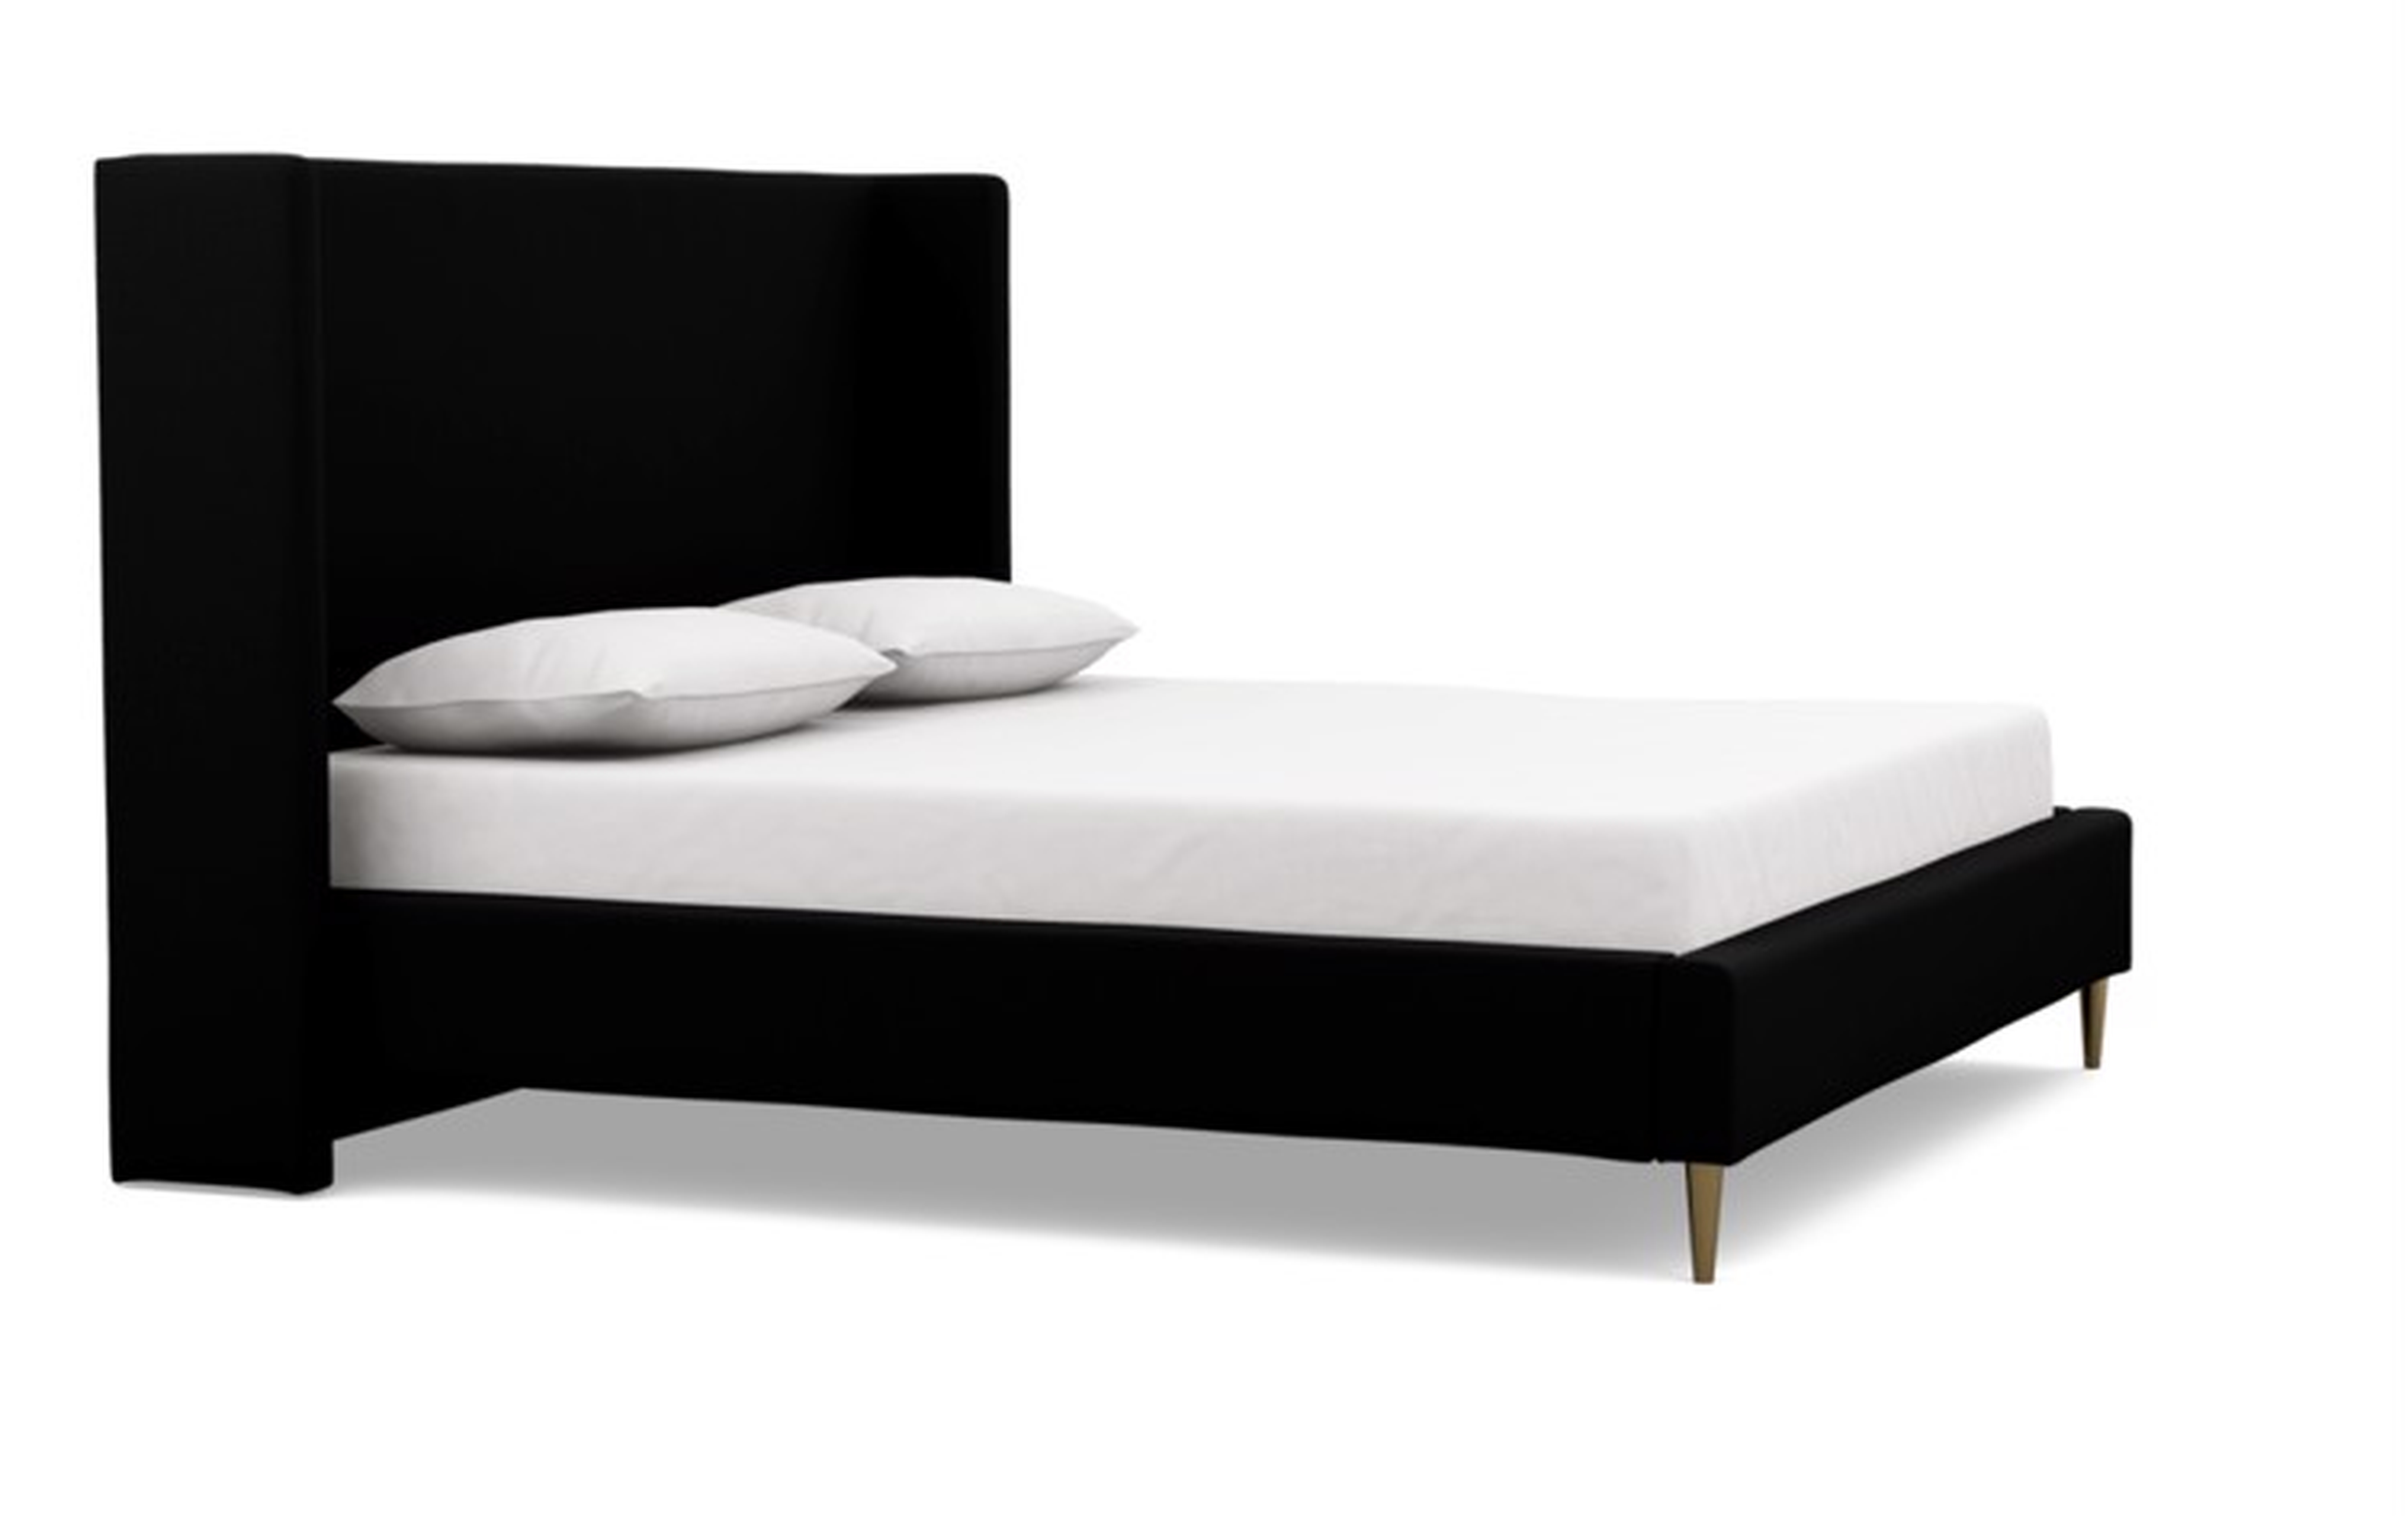 CUSTOM: Oliver Cal King Bed - Panther Heavy Cloth, Brass Plated Tapered Round Metal legs, High 54" headboard - Interior Define